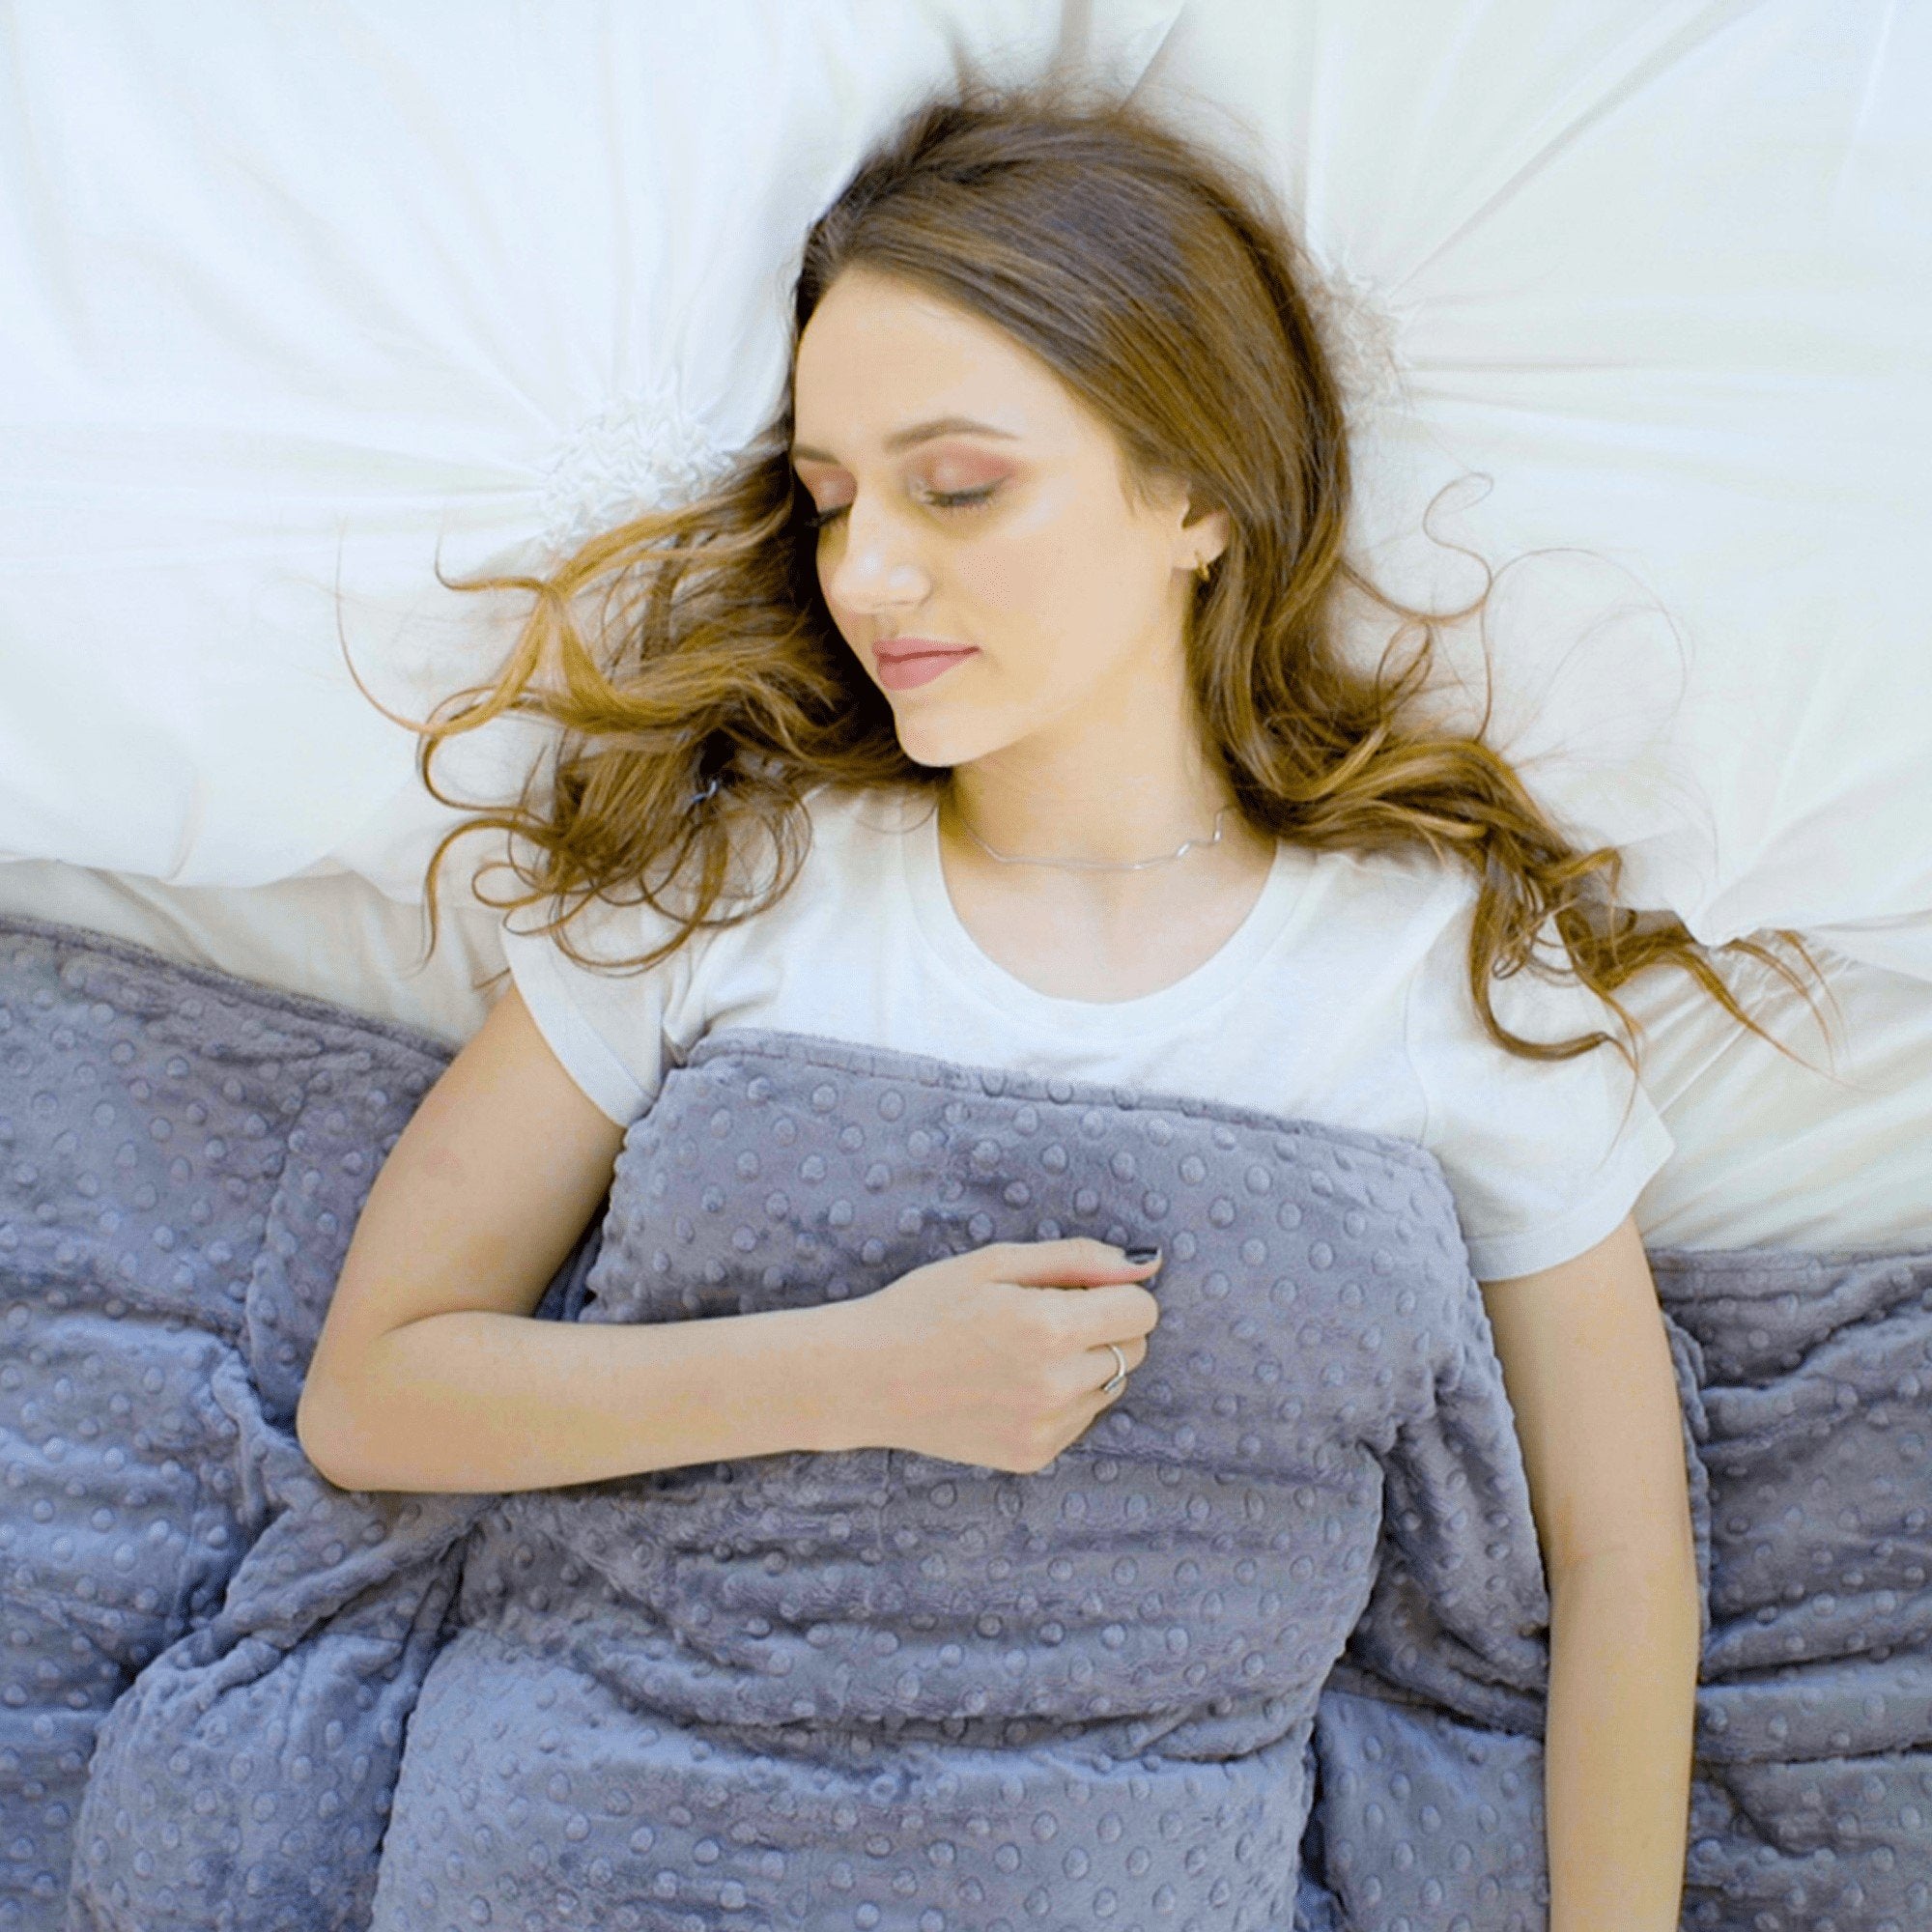 What do people really think of weighted blankets for anxiety and sleep issues?